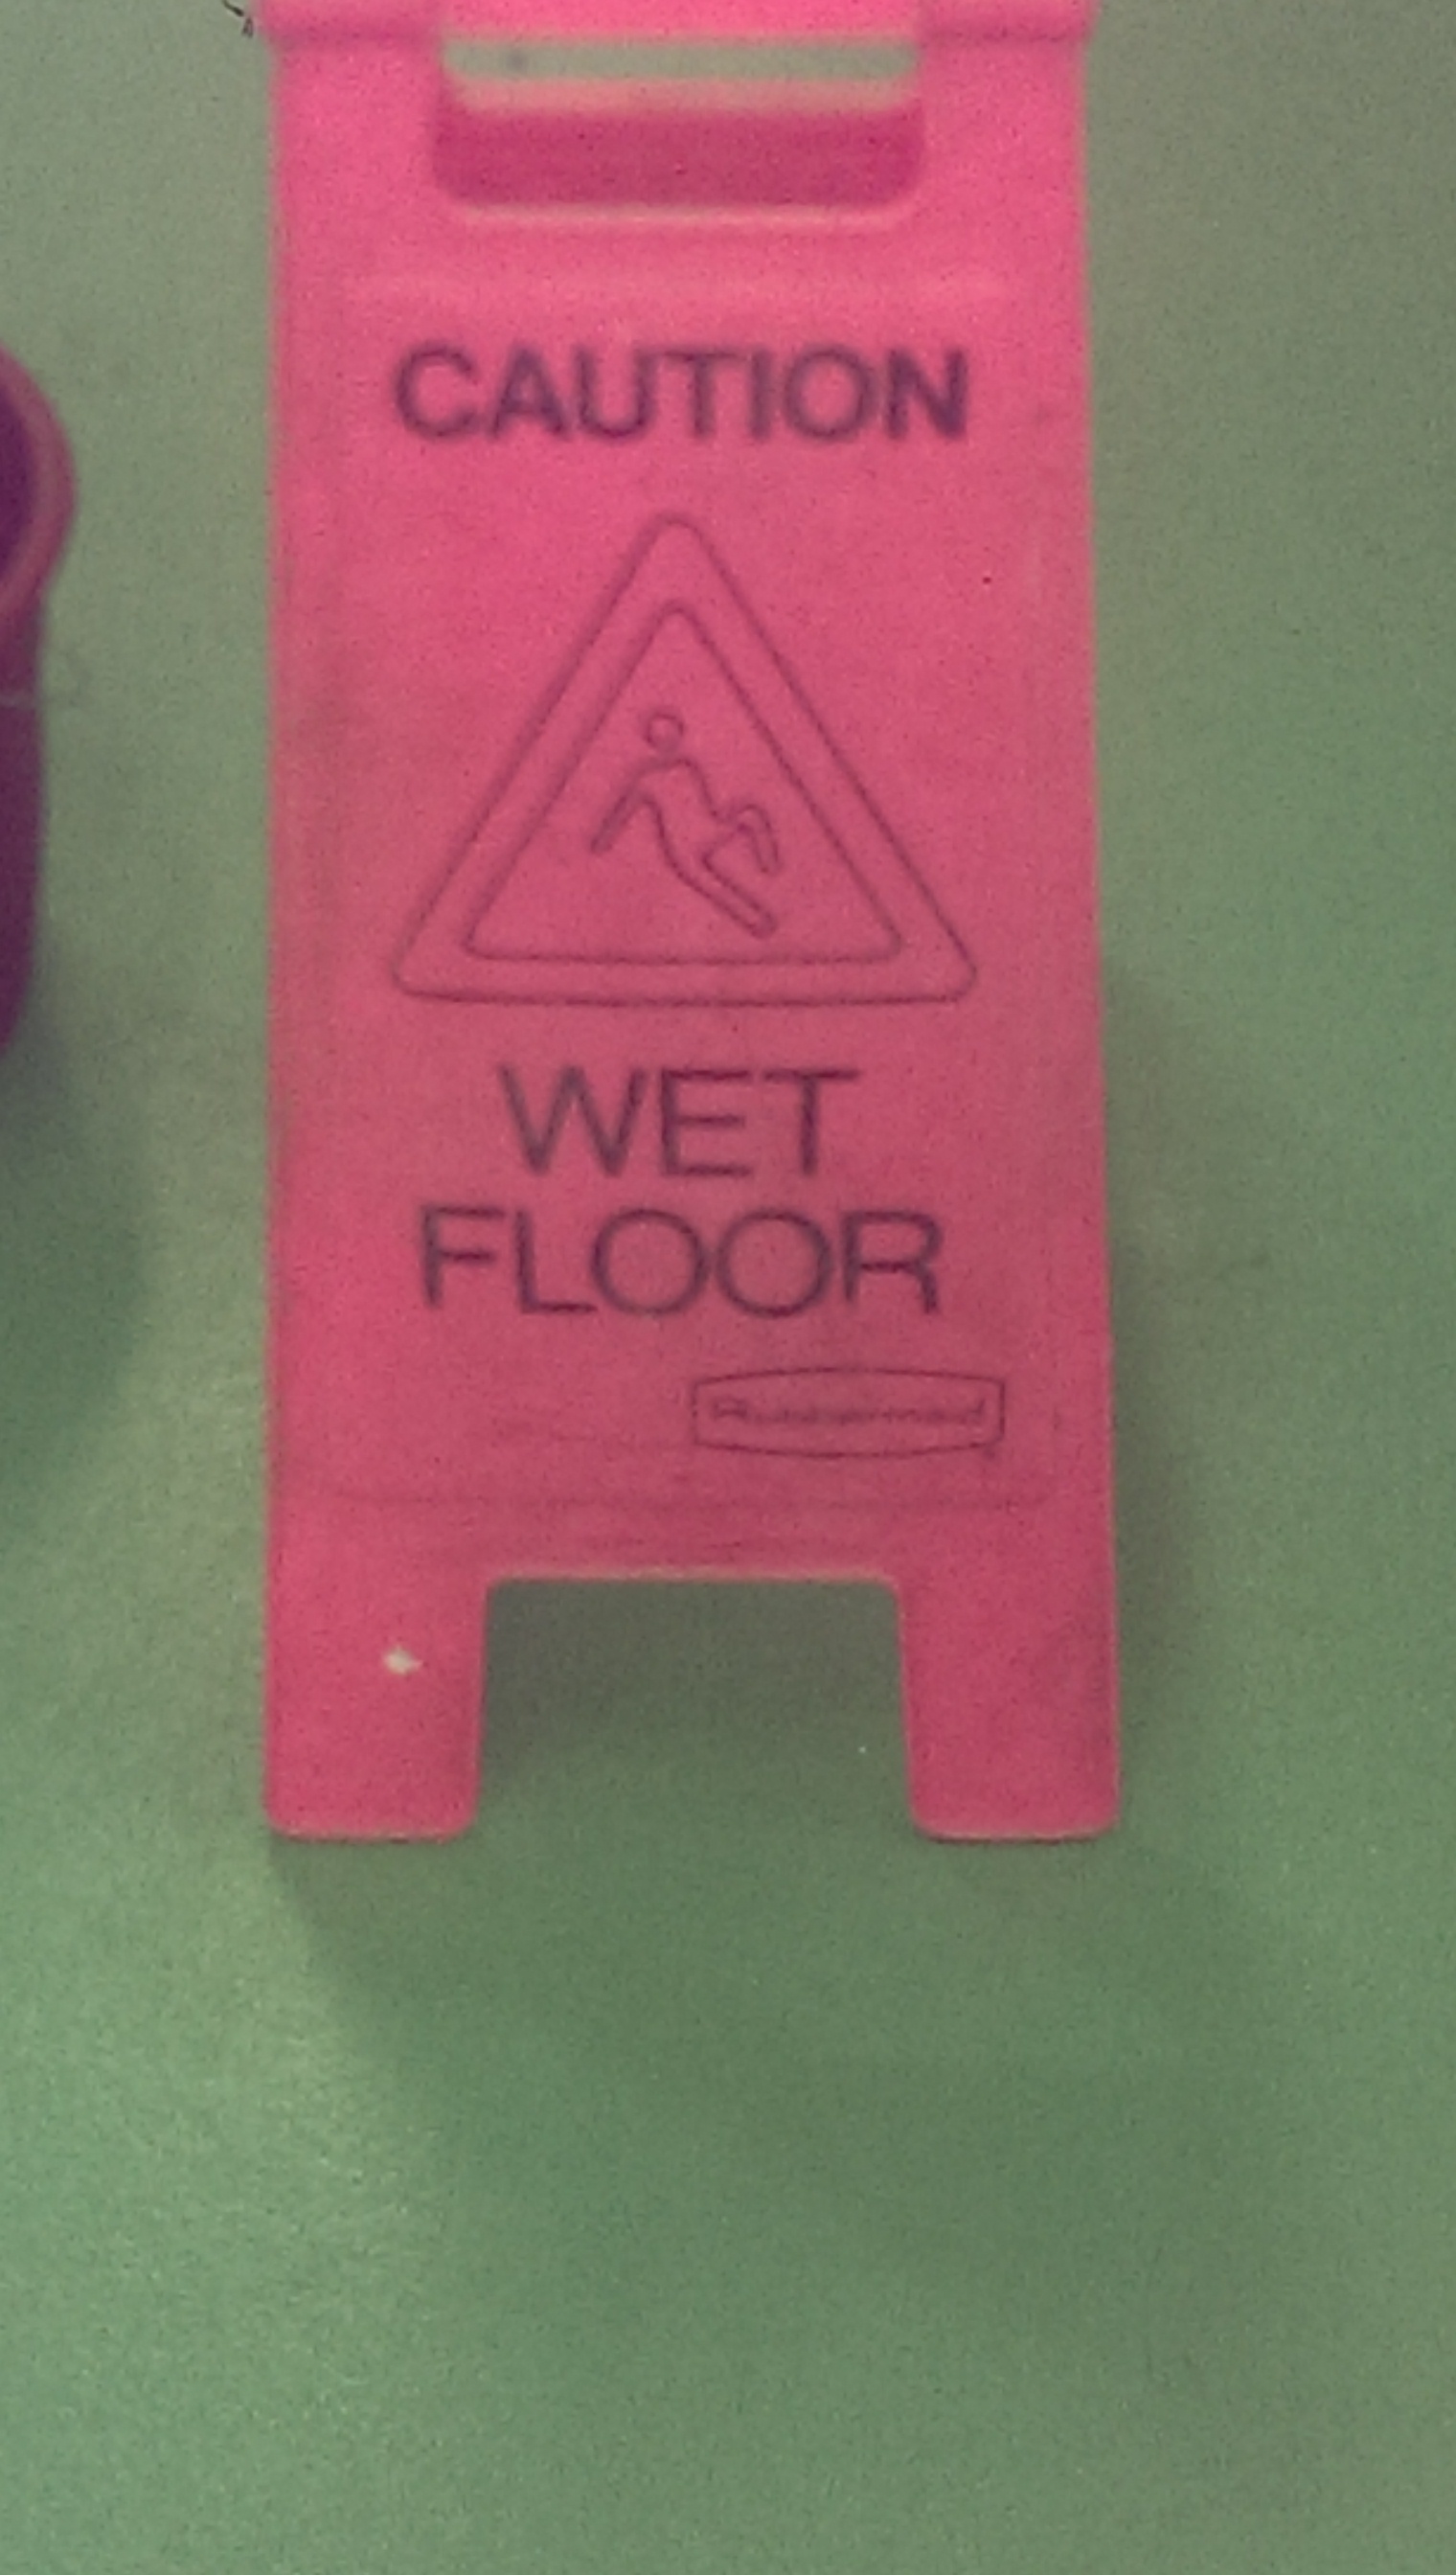 The guy on this wet floor sign looks like he's trying to seduce.